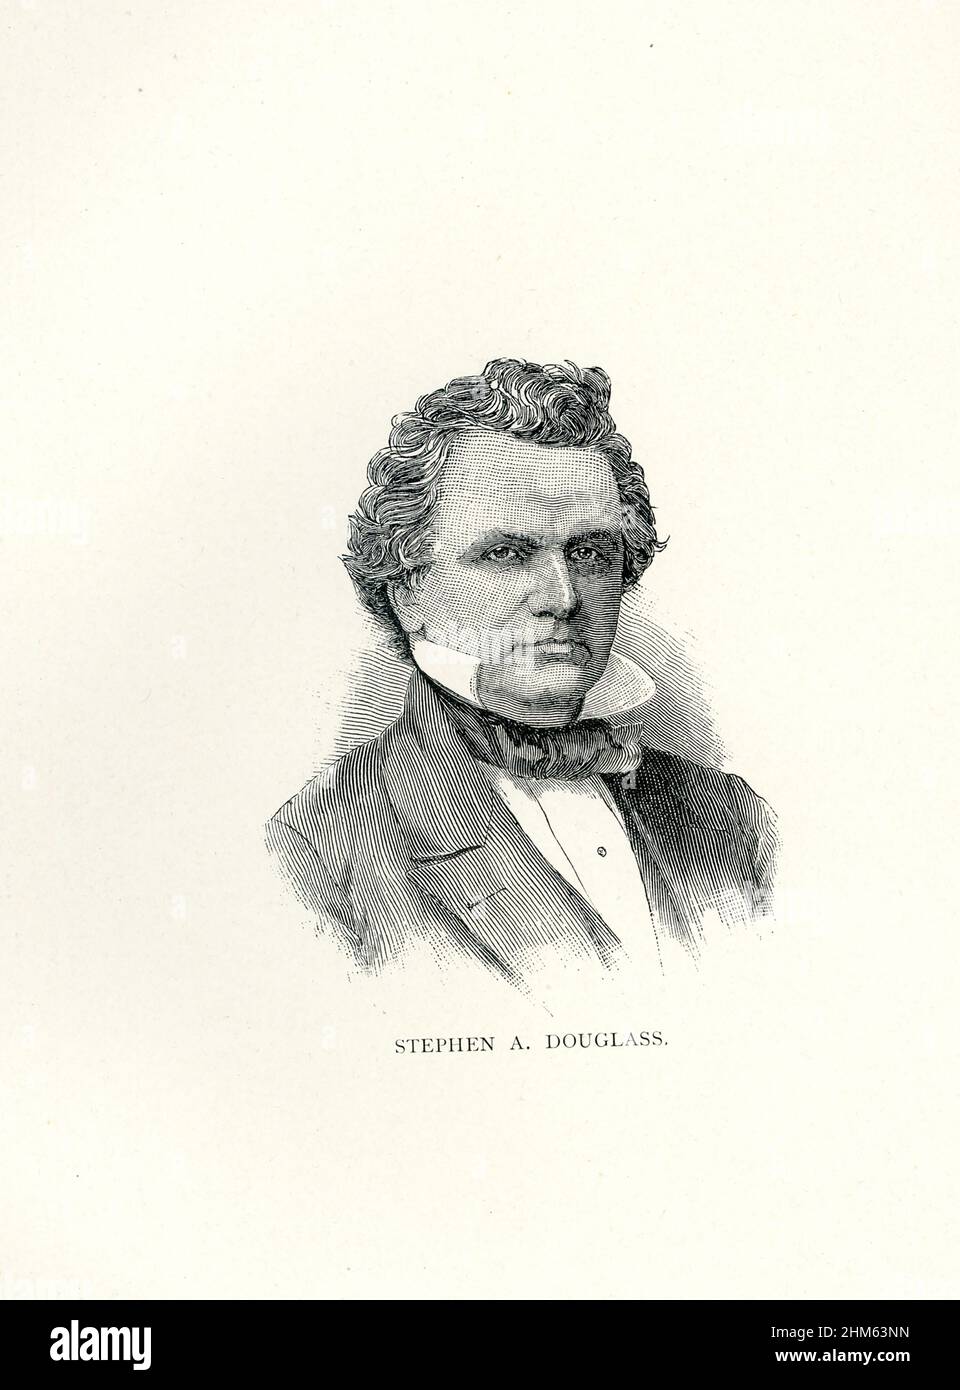 Stephen Arnold Douglas (died 1861) was an American politician and lawyer from Illinois. A senator, he was one of two nominees of the badly split Democratic Party for president in the 1860 presidential election, which was won by Republican Abraham Lincoln. Stock Photo